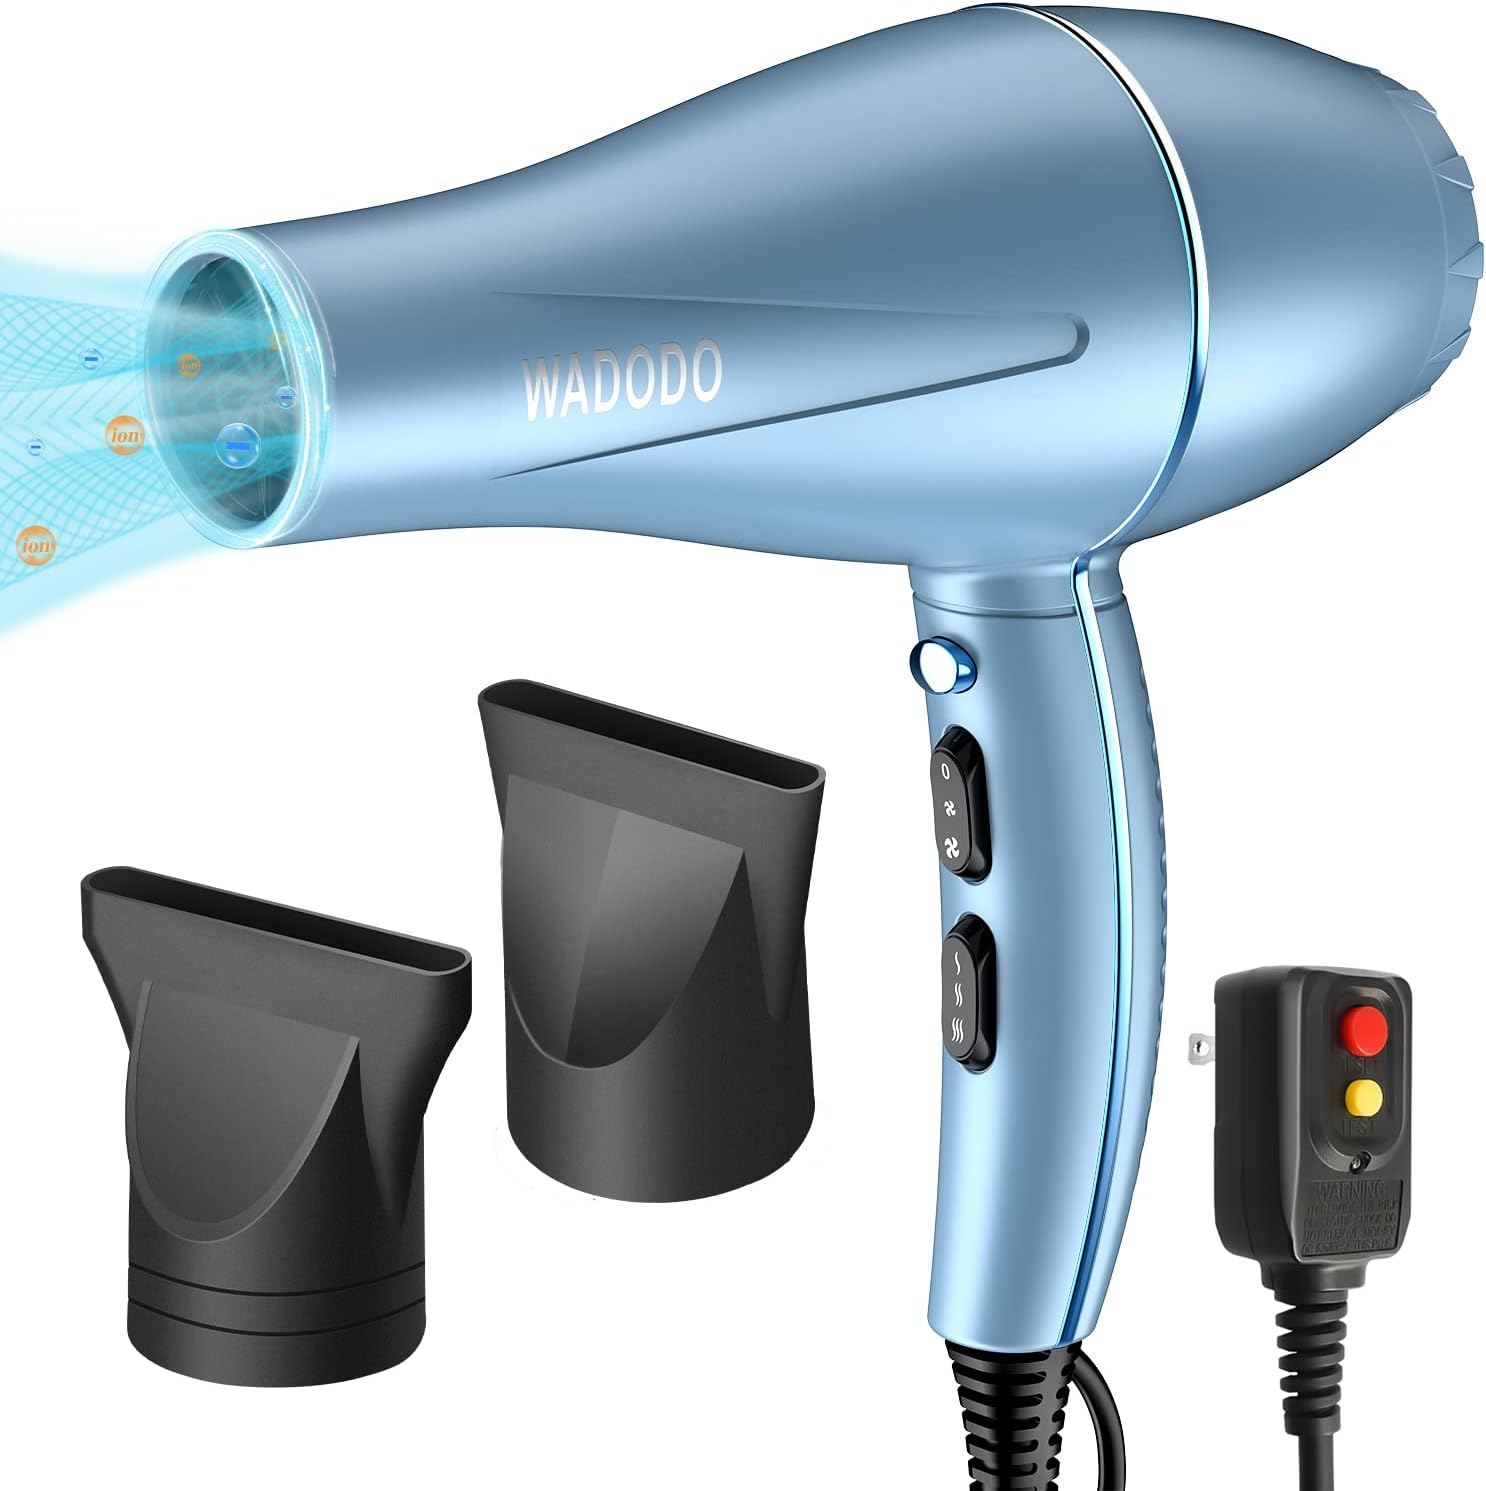 Ionic Hair Dryer, 2200W Professional Blow Dryer Fast Drying Travel Hair Dryer, AC Motor Constant Temperature Low Noise Ion Hair Dryers Curly Hair Care Hairdryer Blowdryer for Women Men(Blue)